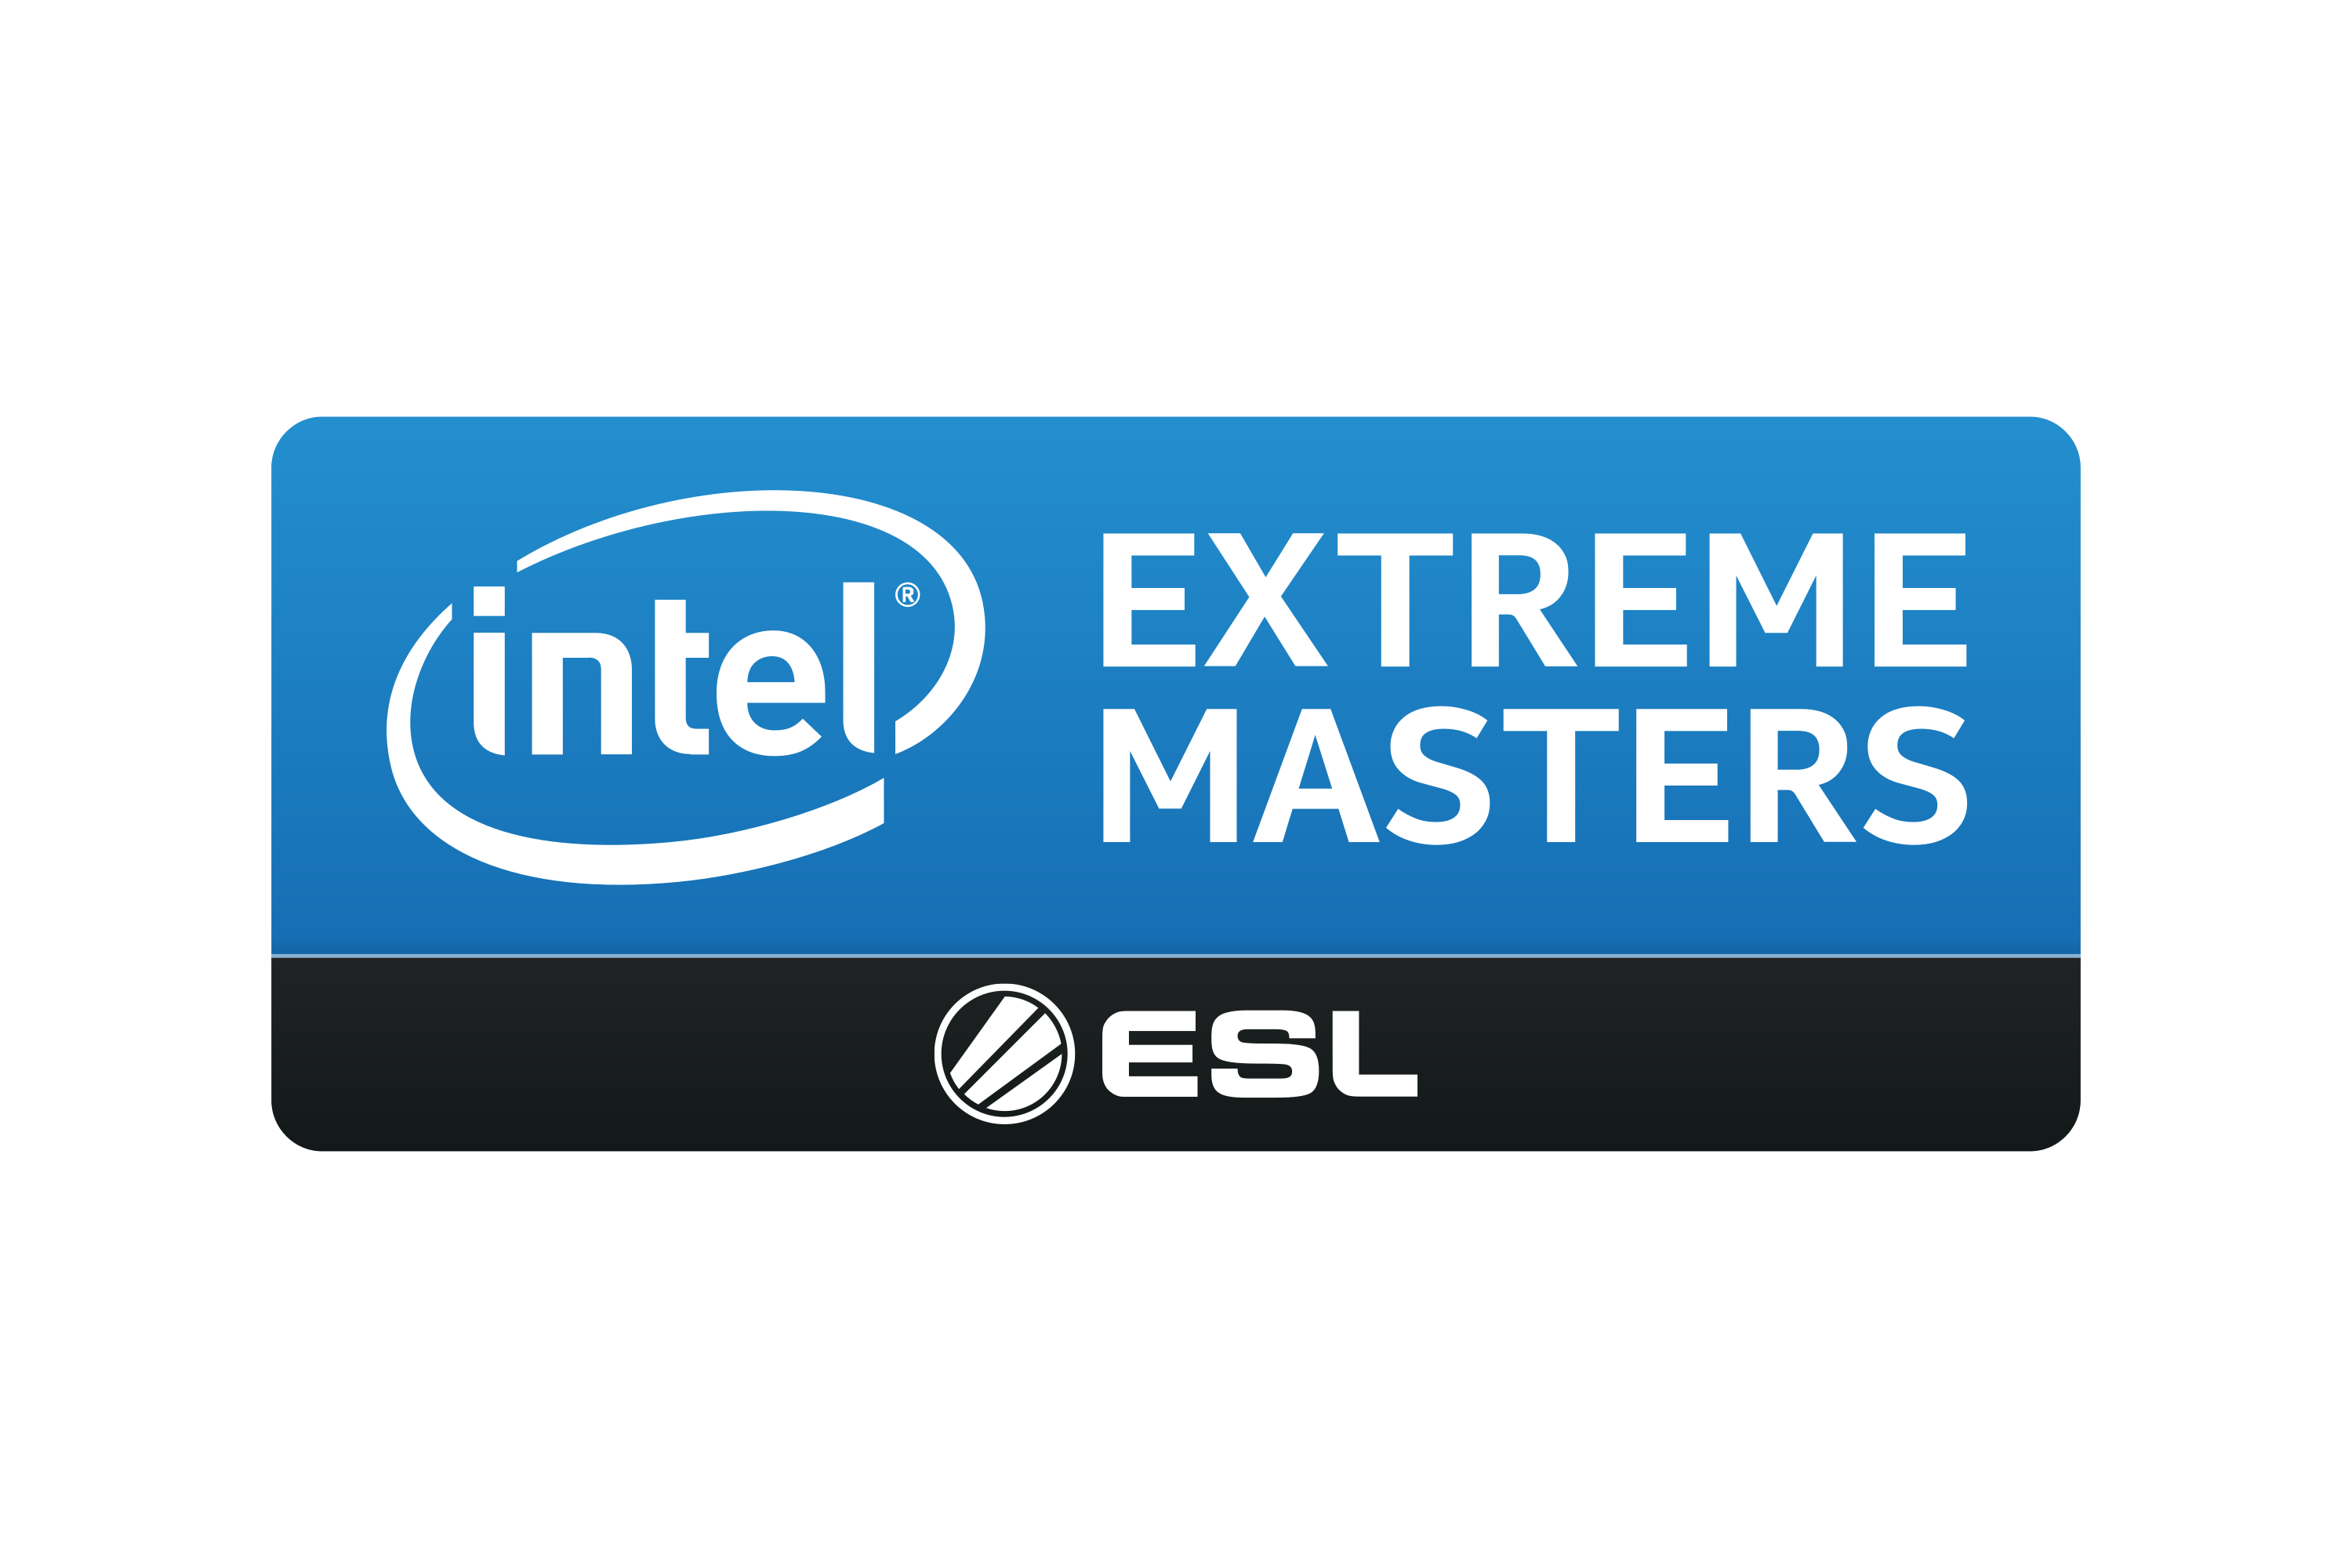 Download Intel Extreme Masters Logo in SVG Vector or PNG File